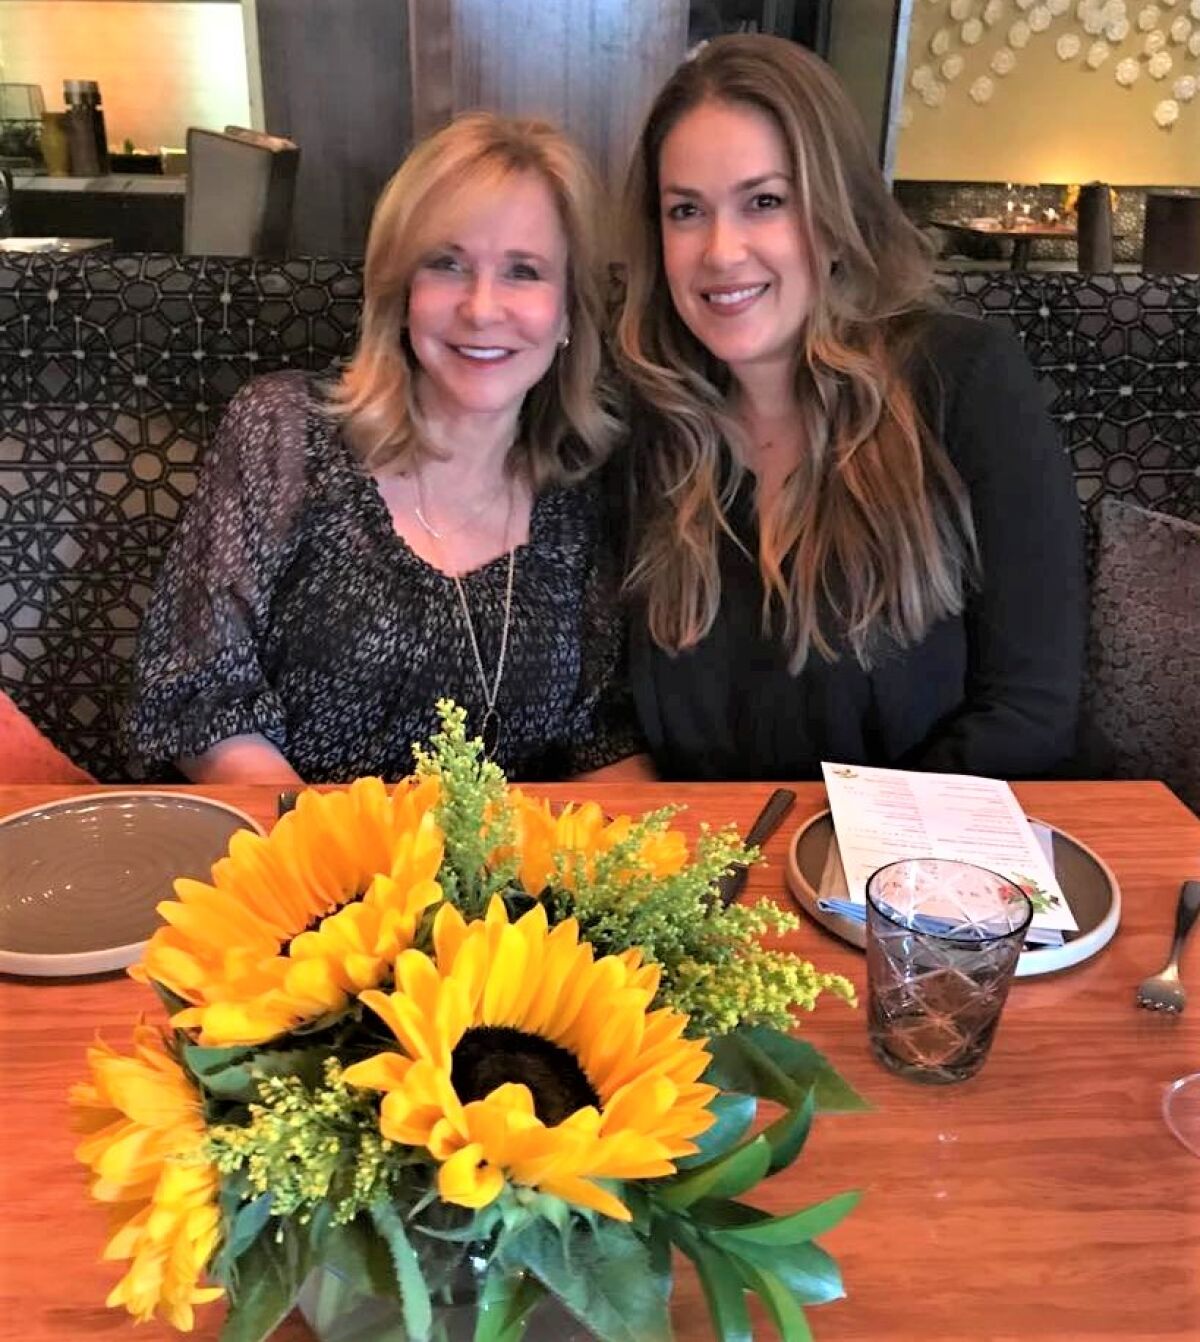 Jenina Peraza, r, with her mom Stacey Foxworth, of Olivenhain, has a lot in common with Celine Dion: stiff person syndrome.